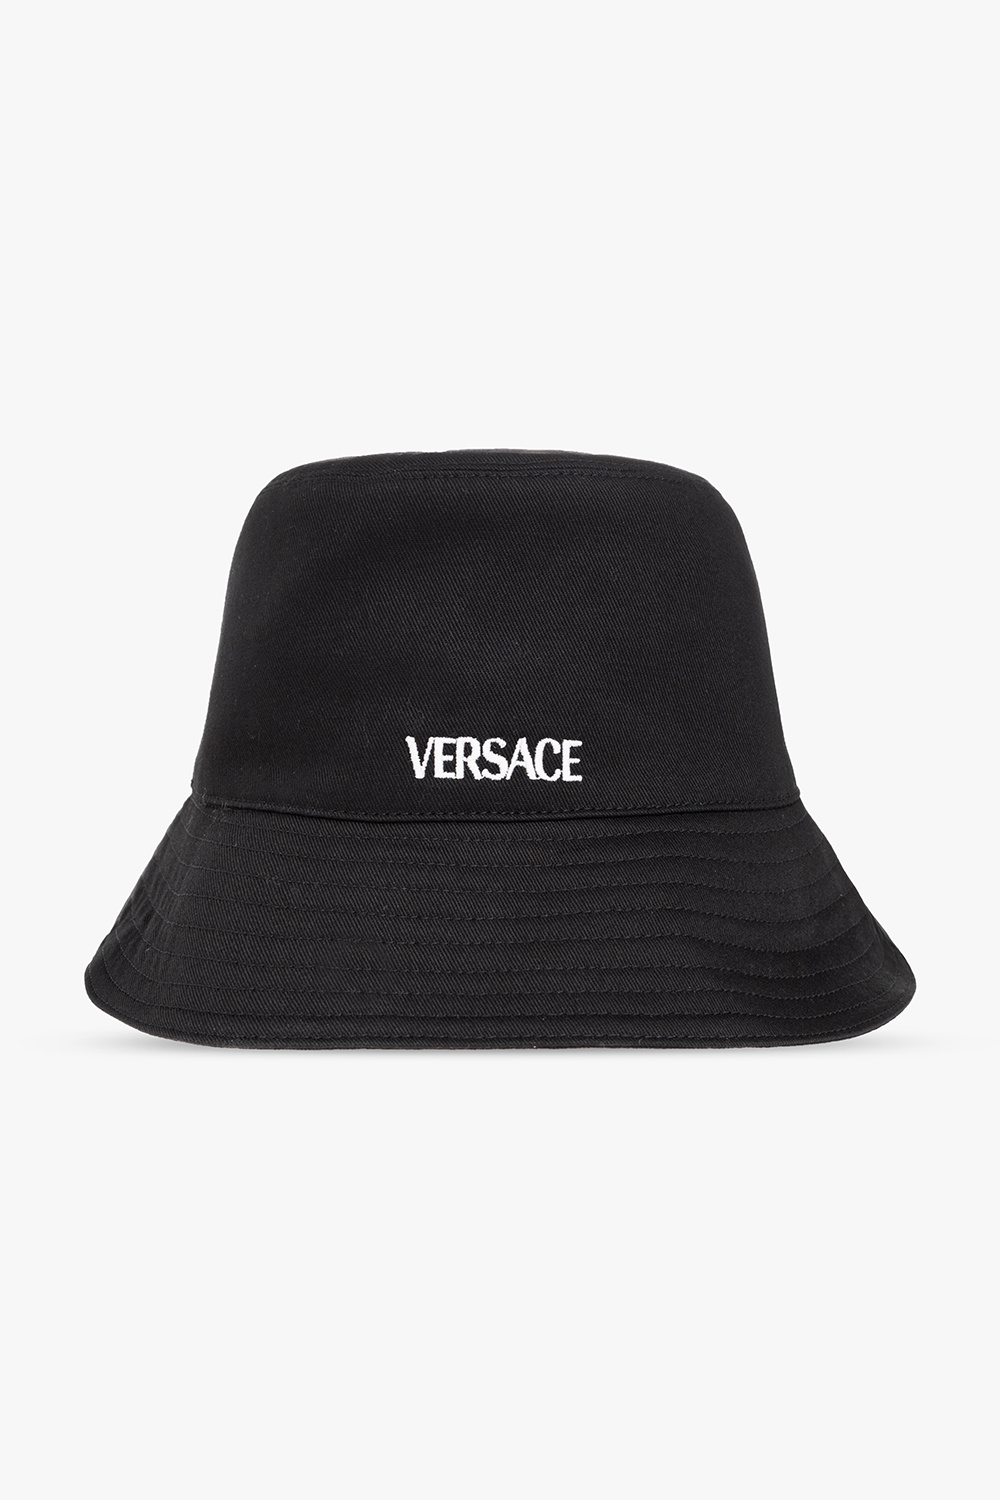 Versace Another iconic slogan cap from